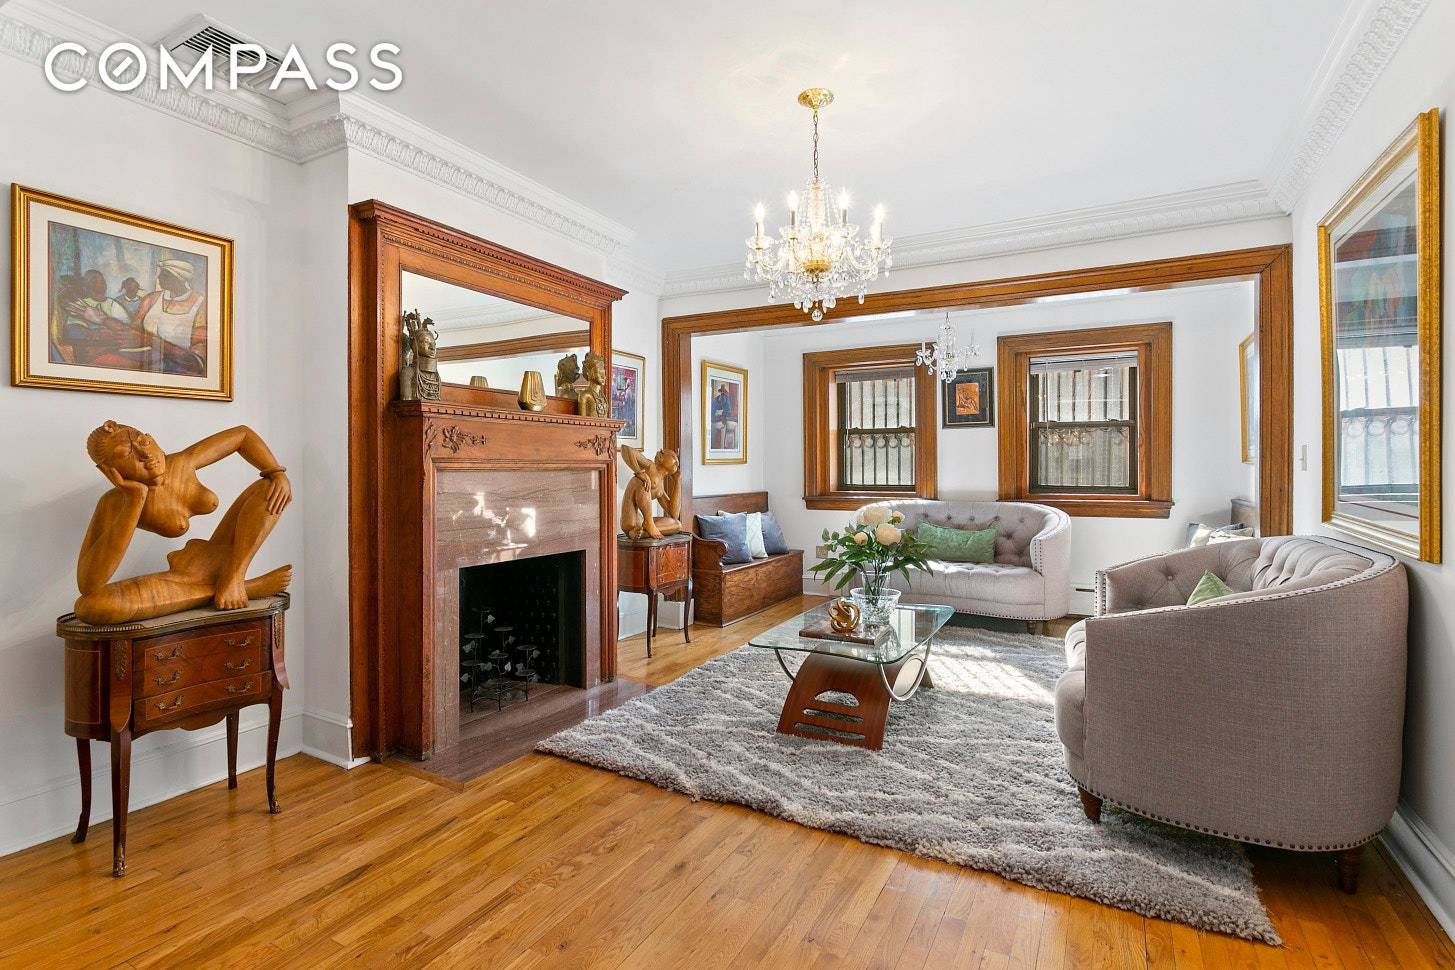 Harlem's most architecturally significant home may also be it's most charming.